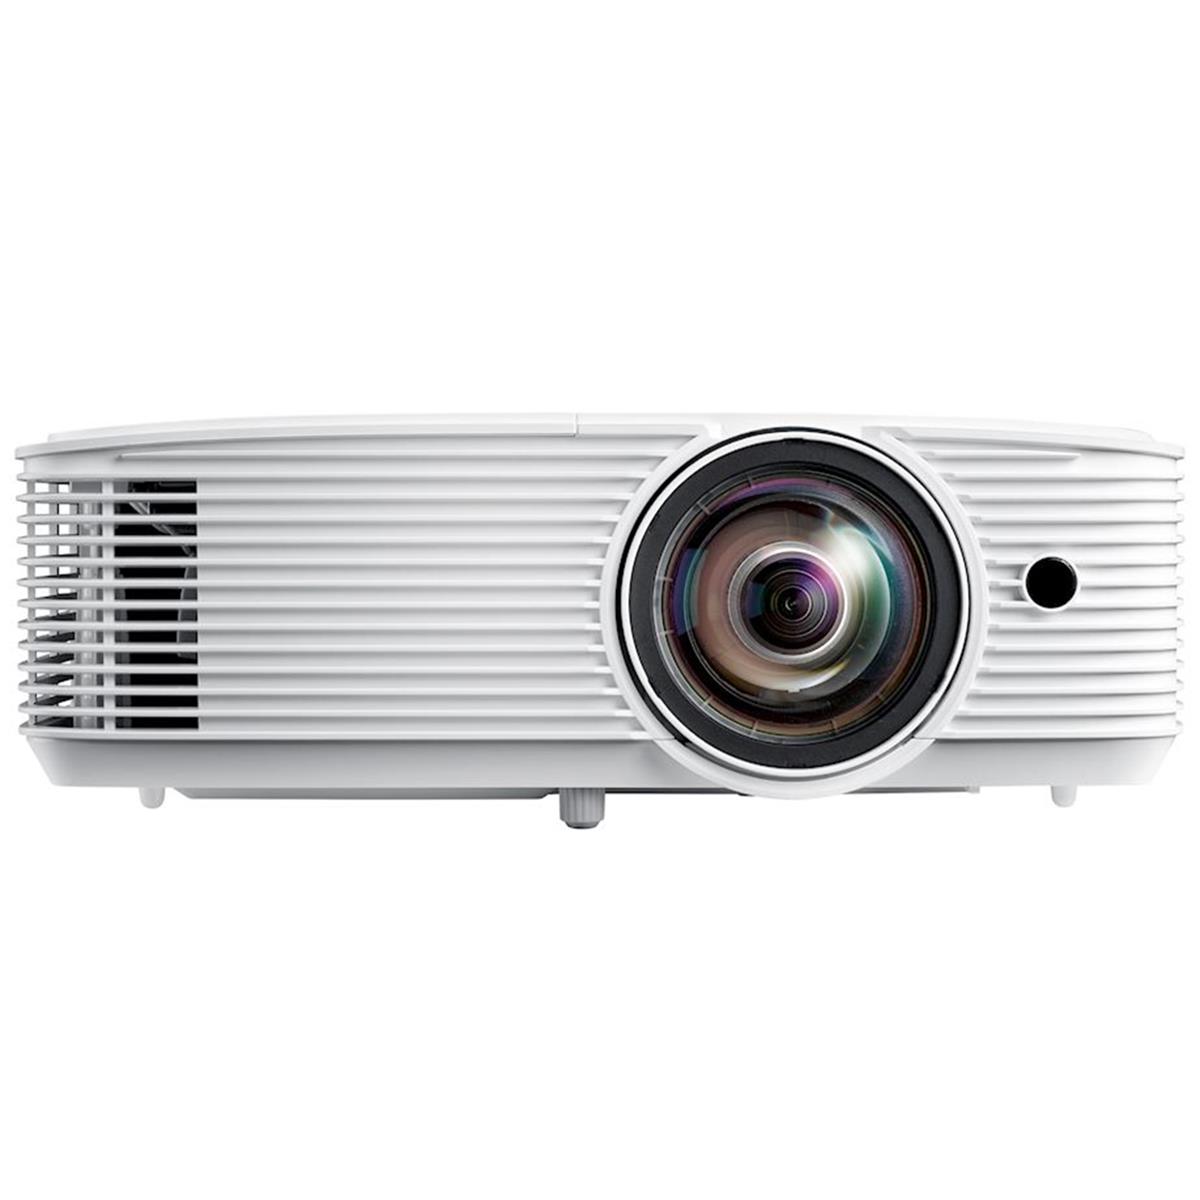 WXGA Short-Throw DLP Home Theater and Gaming Projector - Optoma GT780